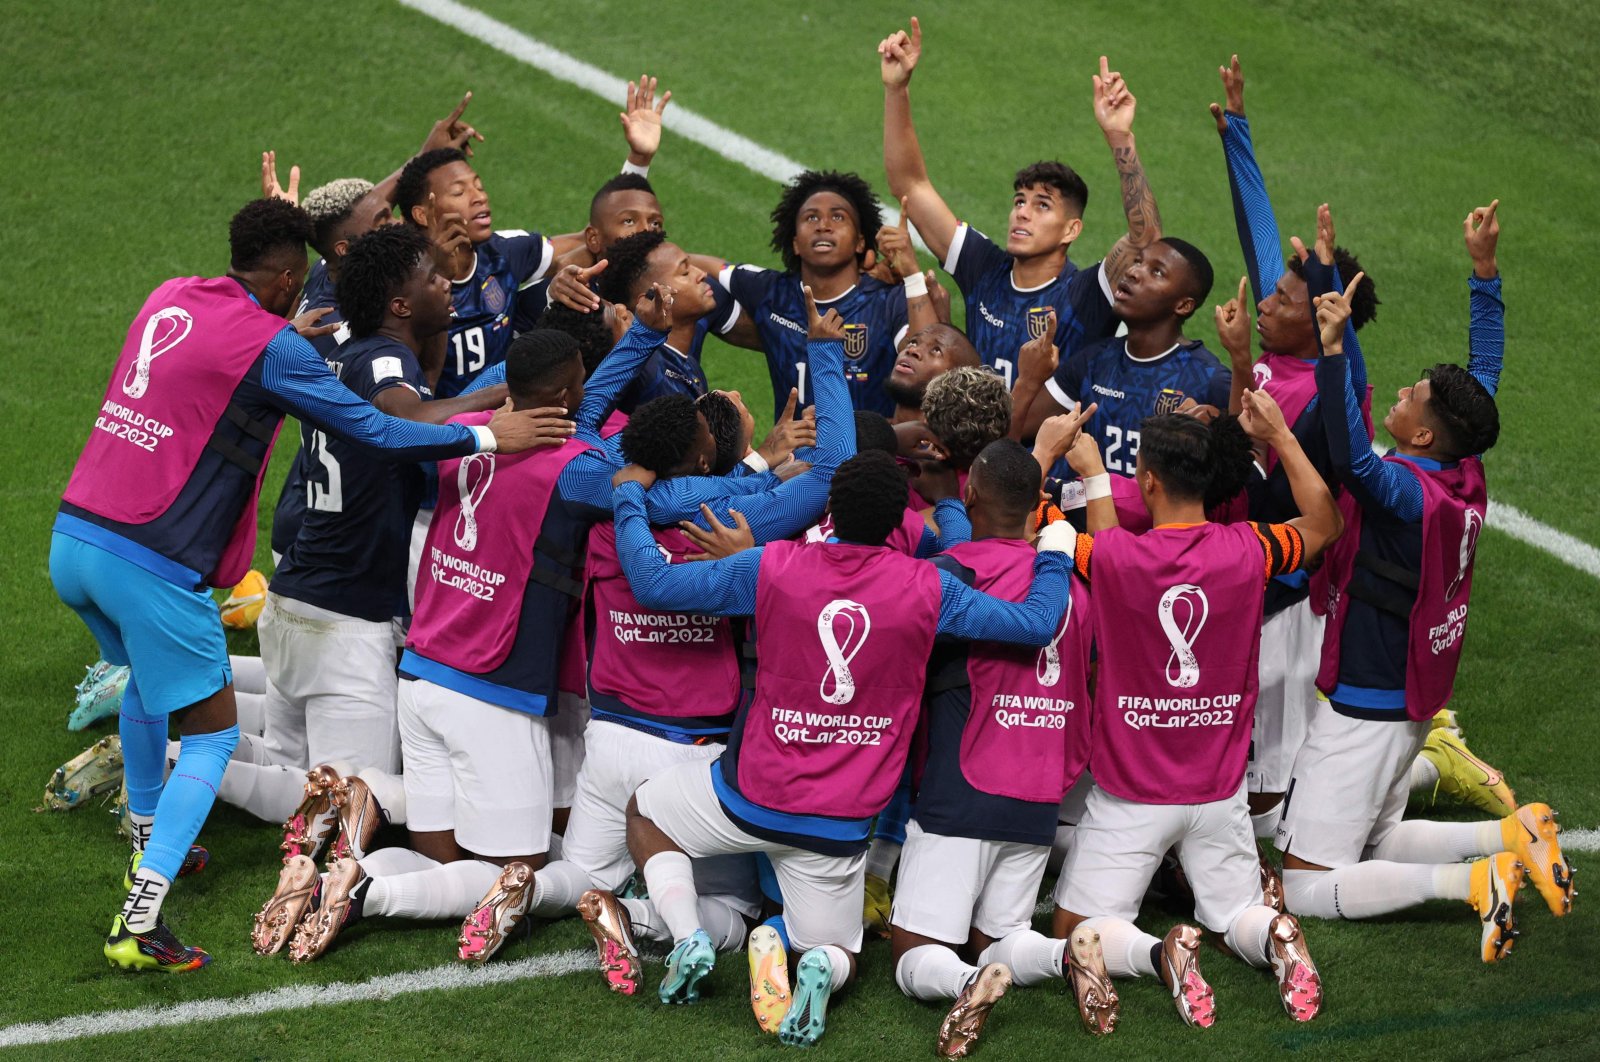 Ecuador players celebrate after Enner Valencia scored his team&#039;s first goal during the Qatar 2022 World Cup Group A football match between the Netherlands and Ecuador, at the Khalifa International Stadium, in Doha, Qatar, Nov. 25, 2022. (AFP Photo)